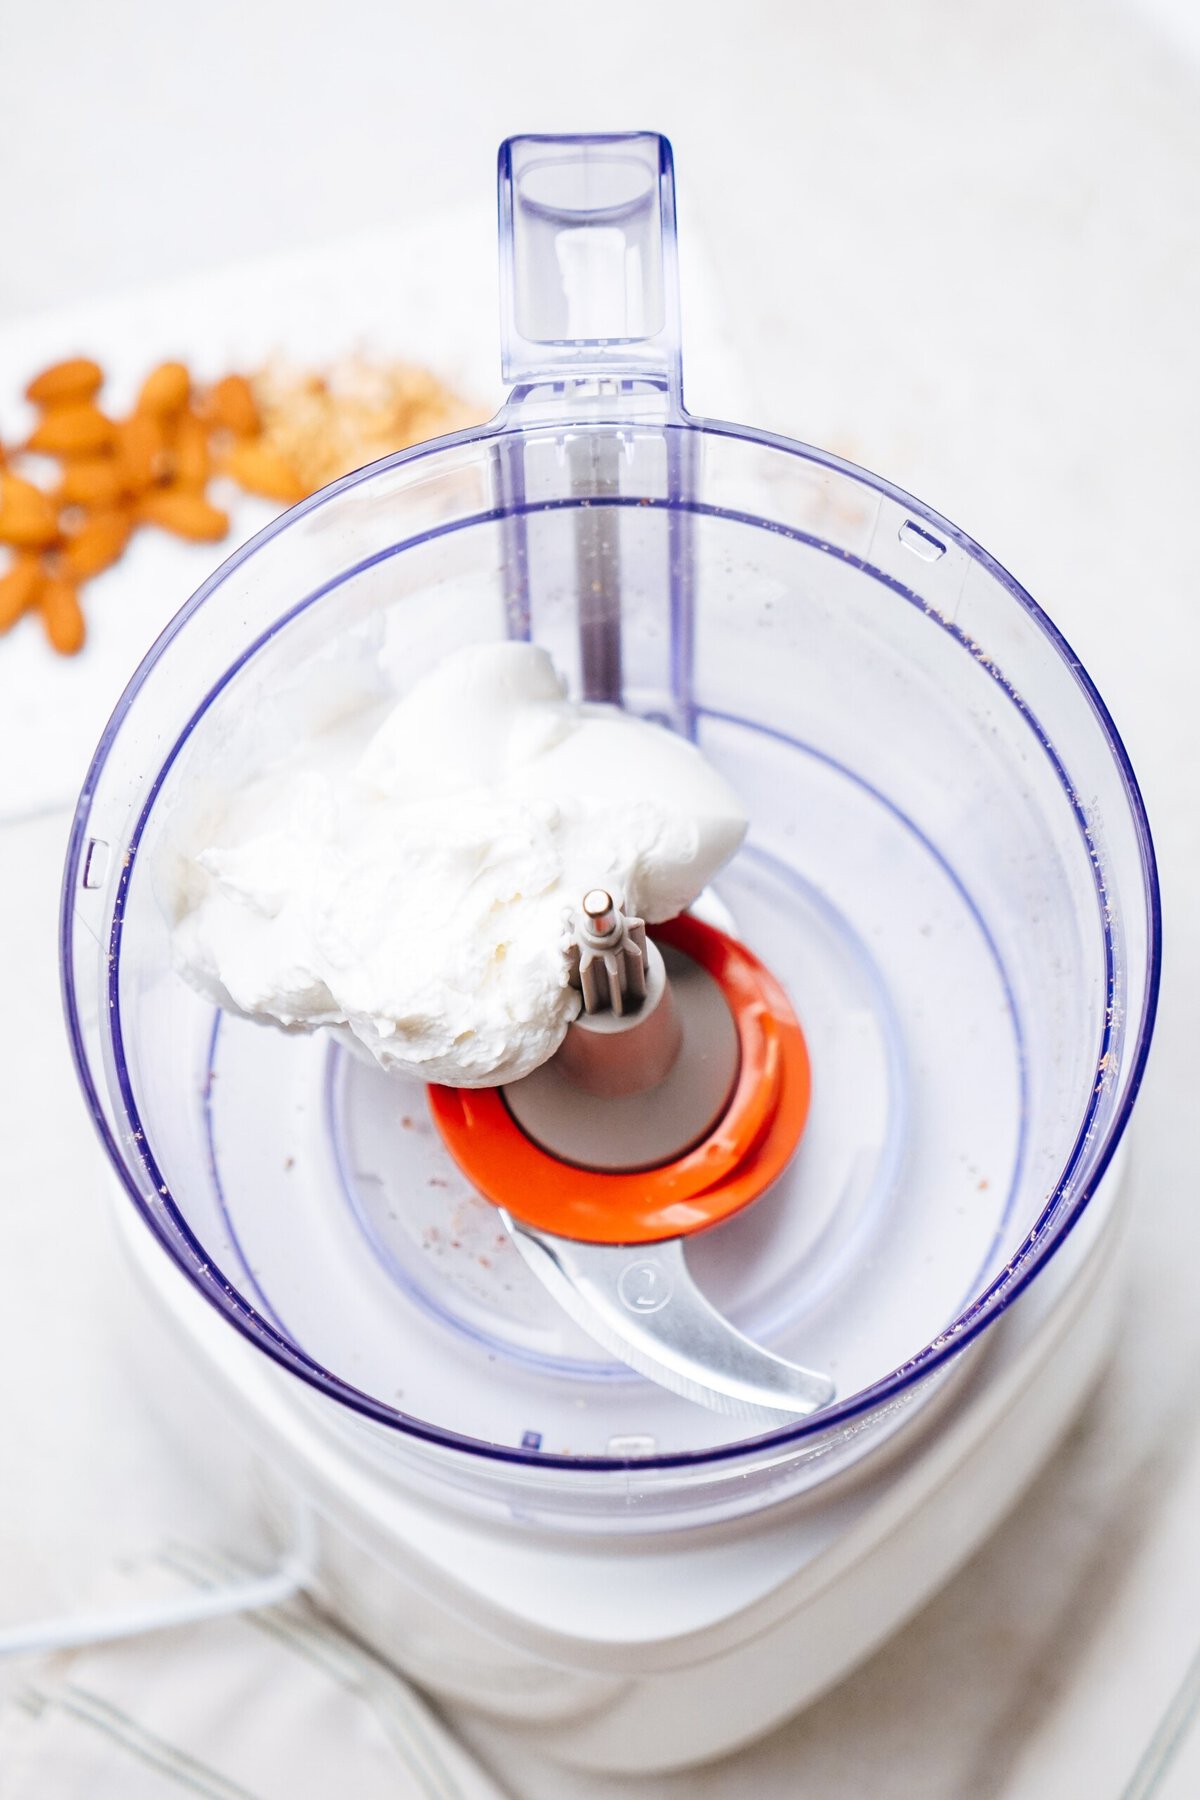 A food processor contains a mixture of white ingredients, presumably cream or whipped product, with a red and silver blade in the center. In the background, there are almonds and other small food items, perhaps for making decadent goat cheese truffles.